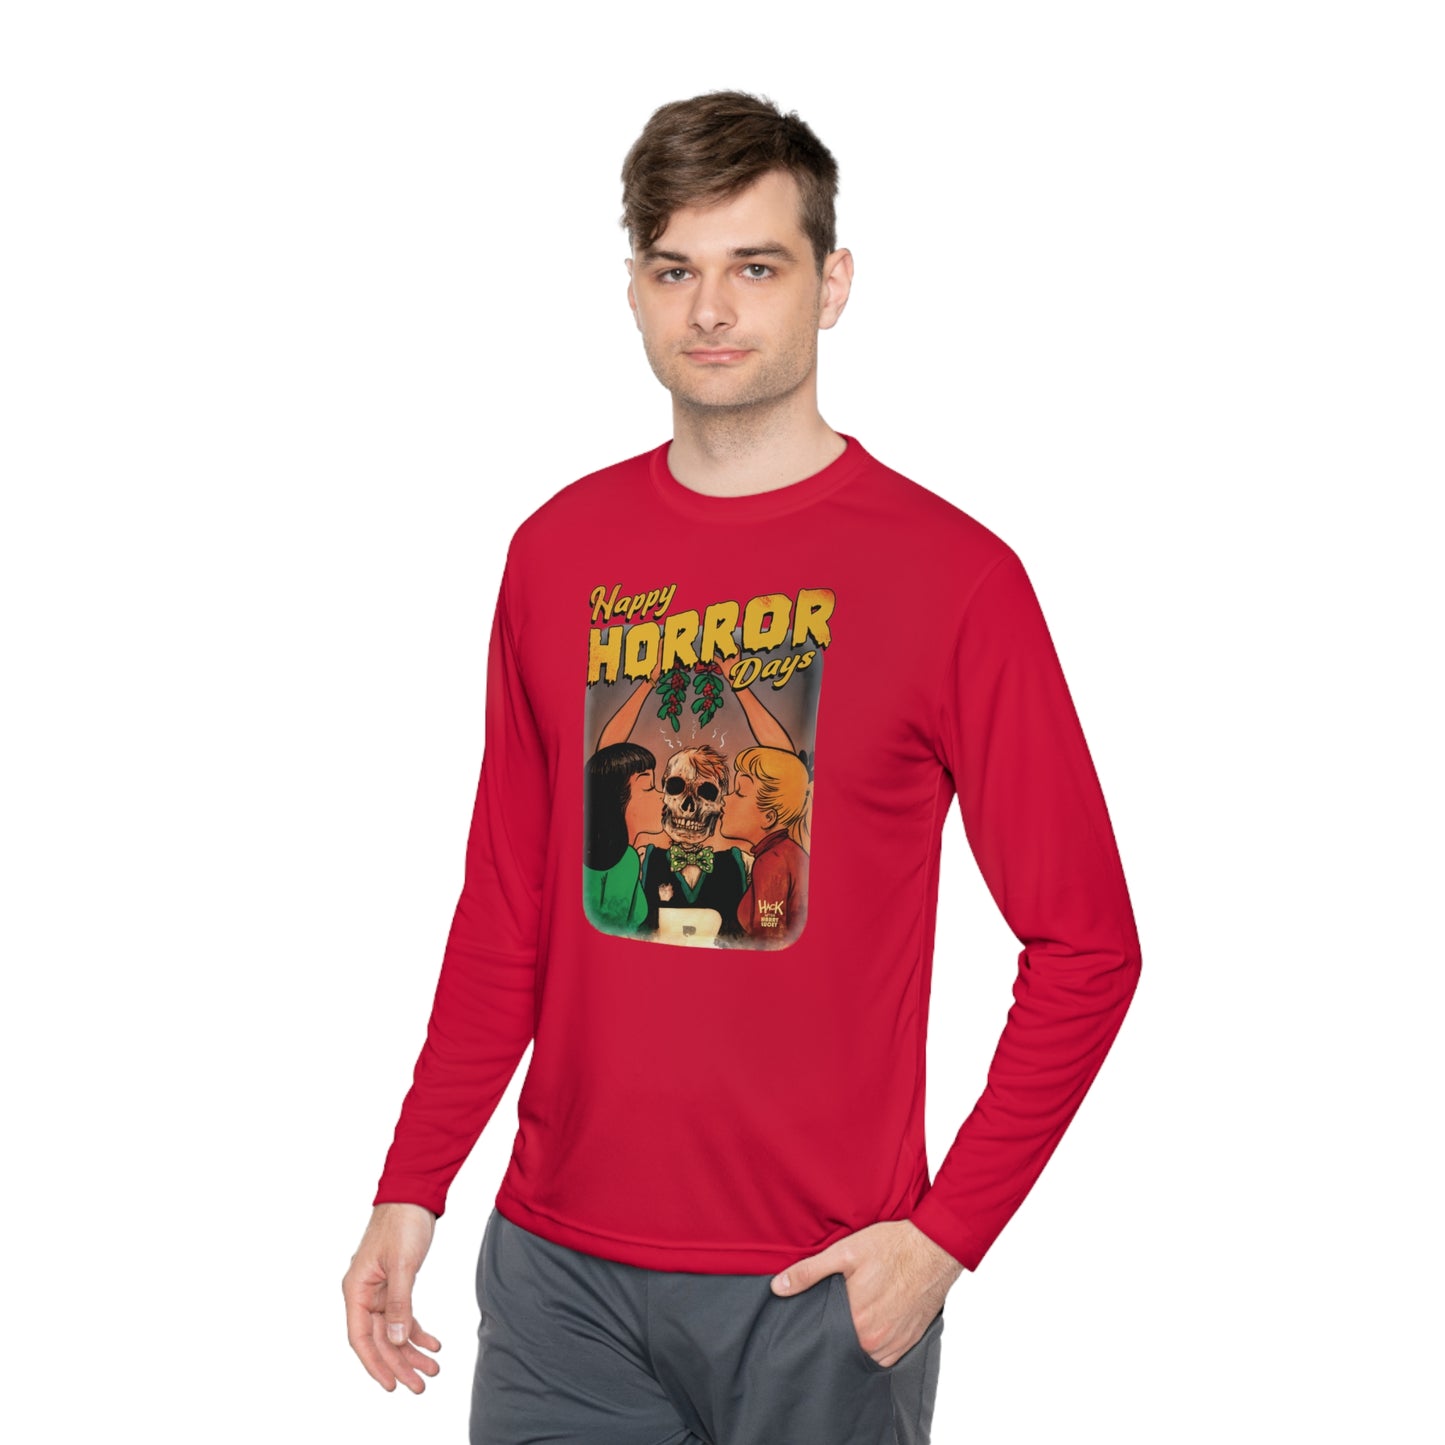 Happy Horror Days Love Triangle Graphic Tee Unisex Lightweight Long Sleeve Tee featuring Archie, Betty, and Veronica